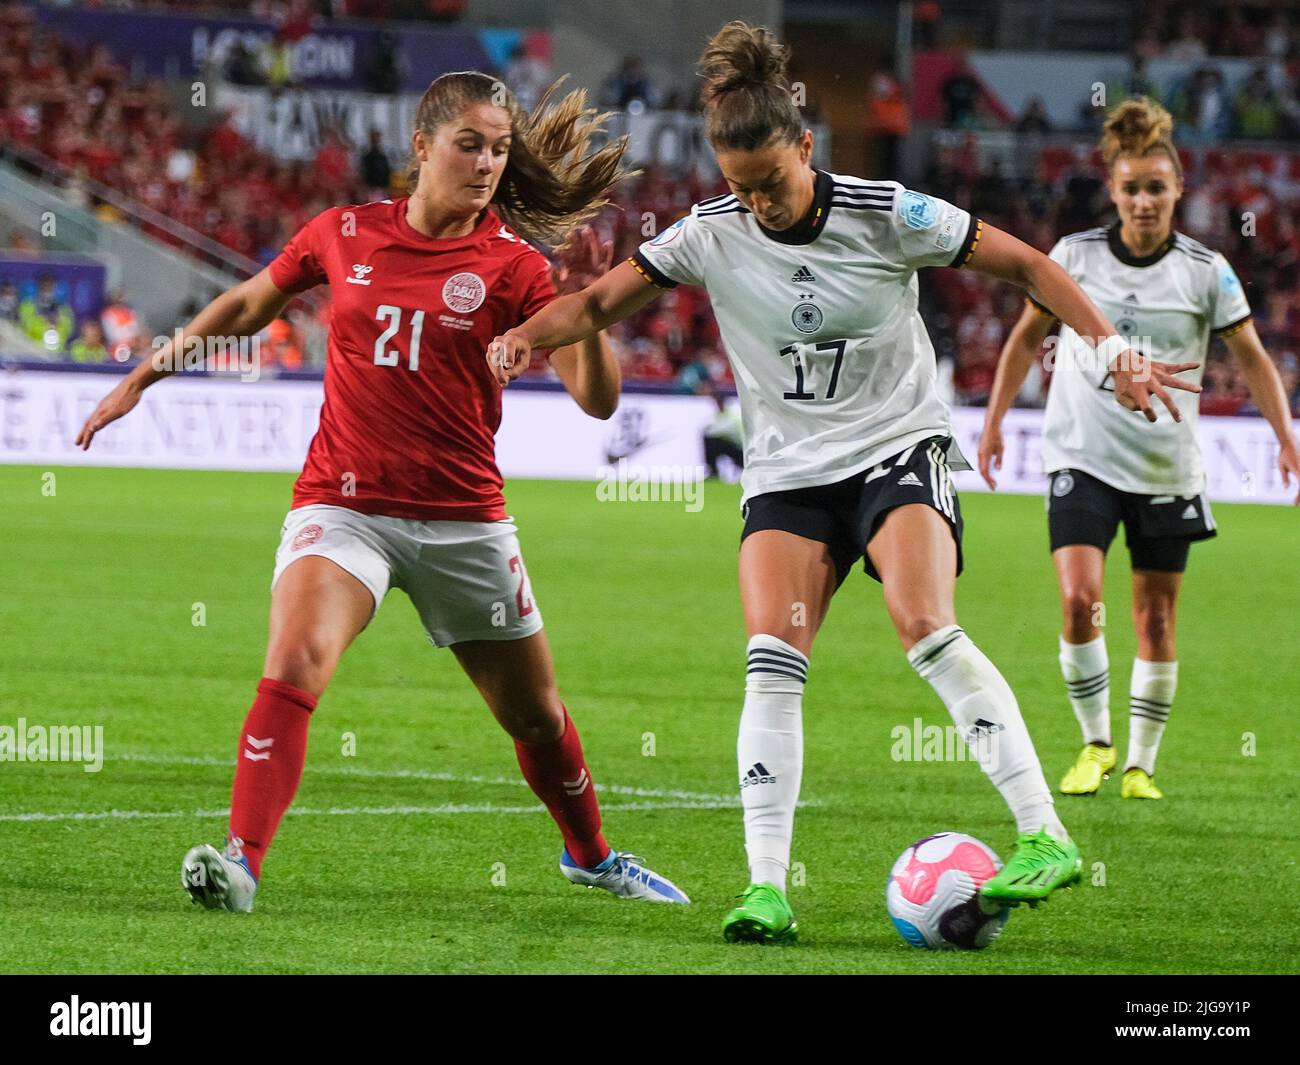 Brentford, London, UK. 7th July, 2022. Mille Gejl (21 Denmark) and Felicitas Rauch (17 Germany) battle for the ball during the UEFA Womens Euro 2022 football match between Germany and Denmark at Brentford Community Stadium in London, England. (Tatjana Herzberg/Soccerdonna/SPP) Credit: SPP Sport Press Photo. /Alamy Live News Stock Photo